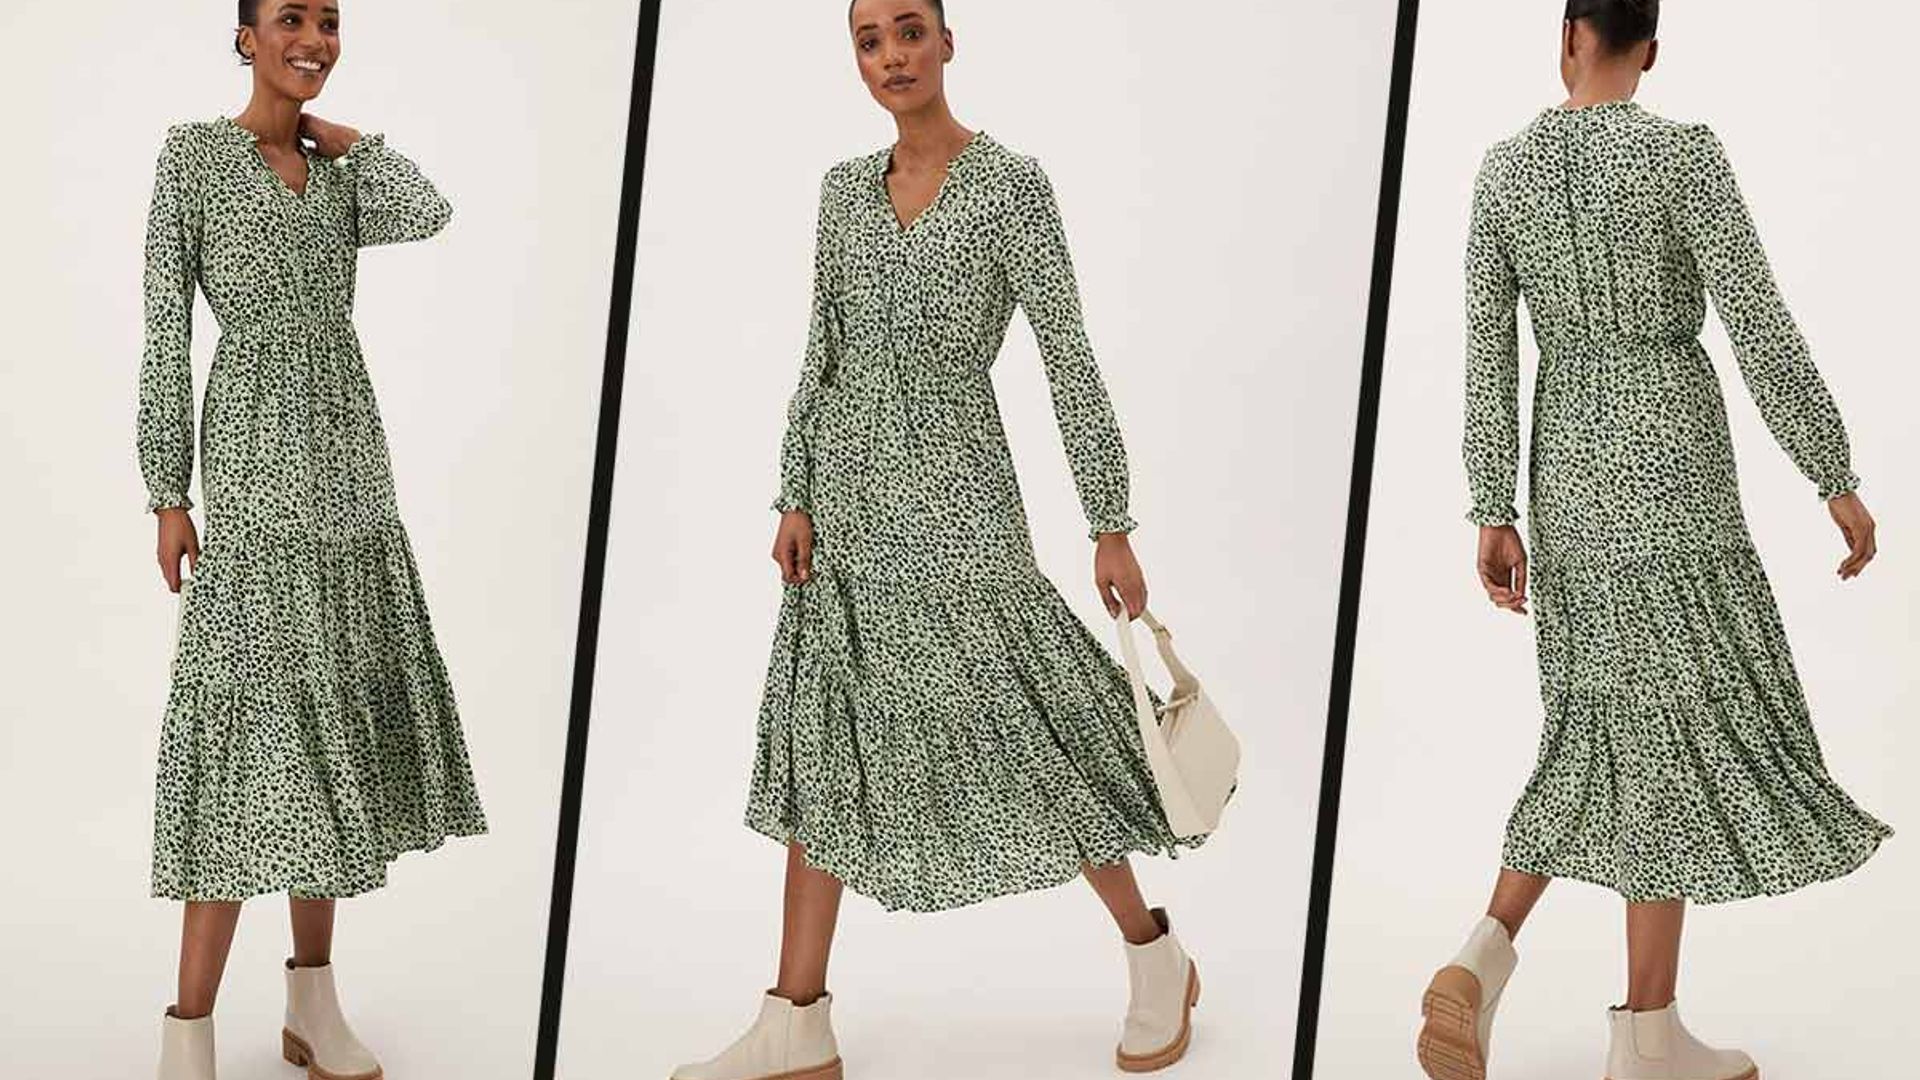 This animal print Marks & Spencer dress is going to be the dress of the season